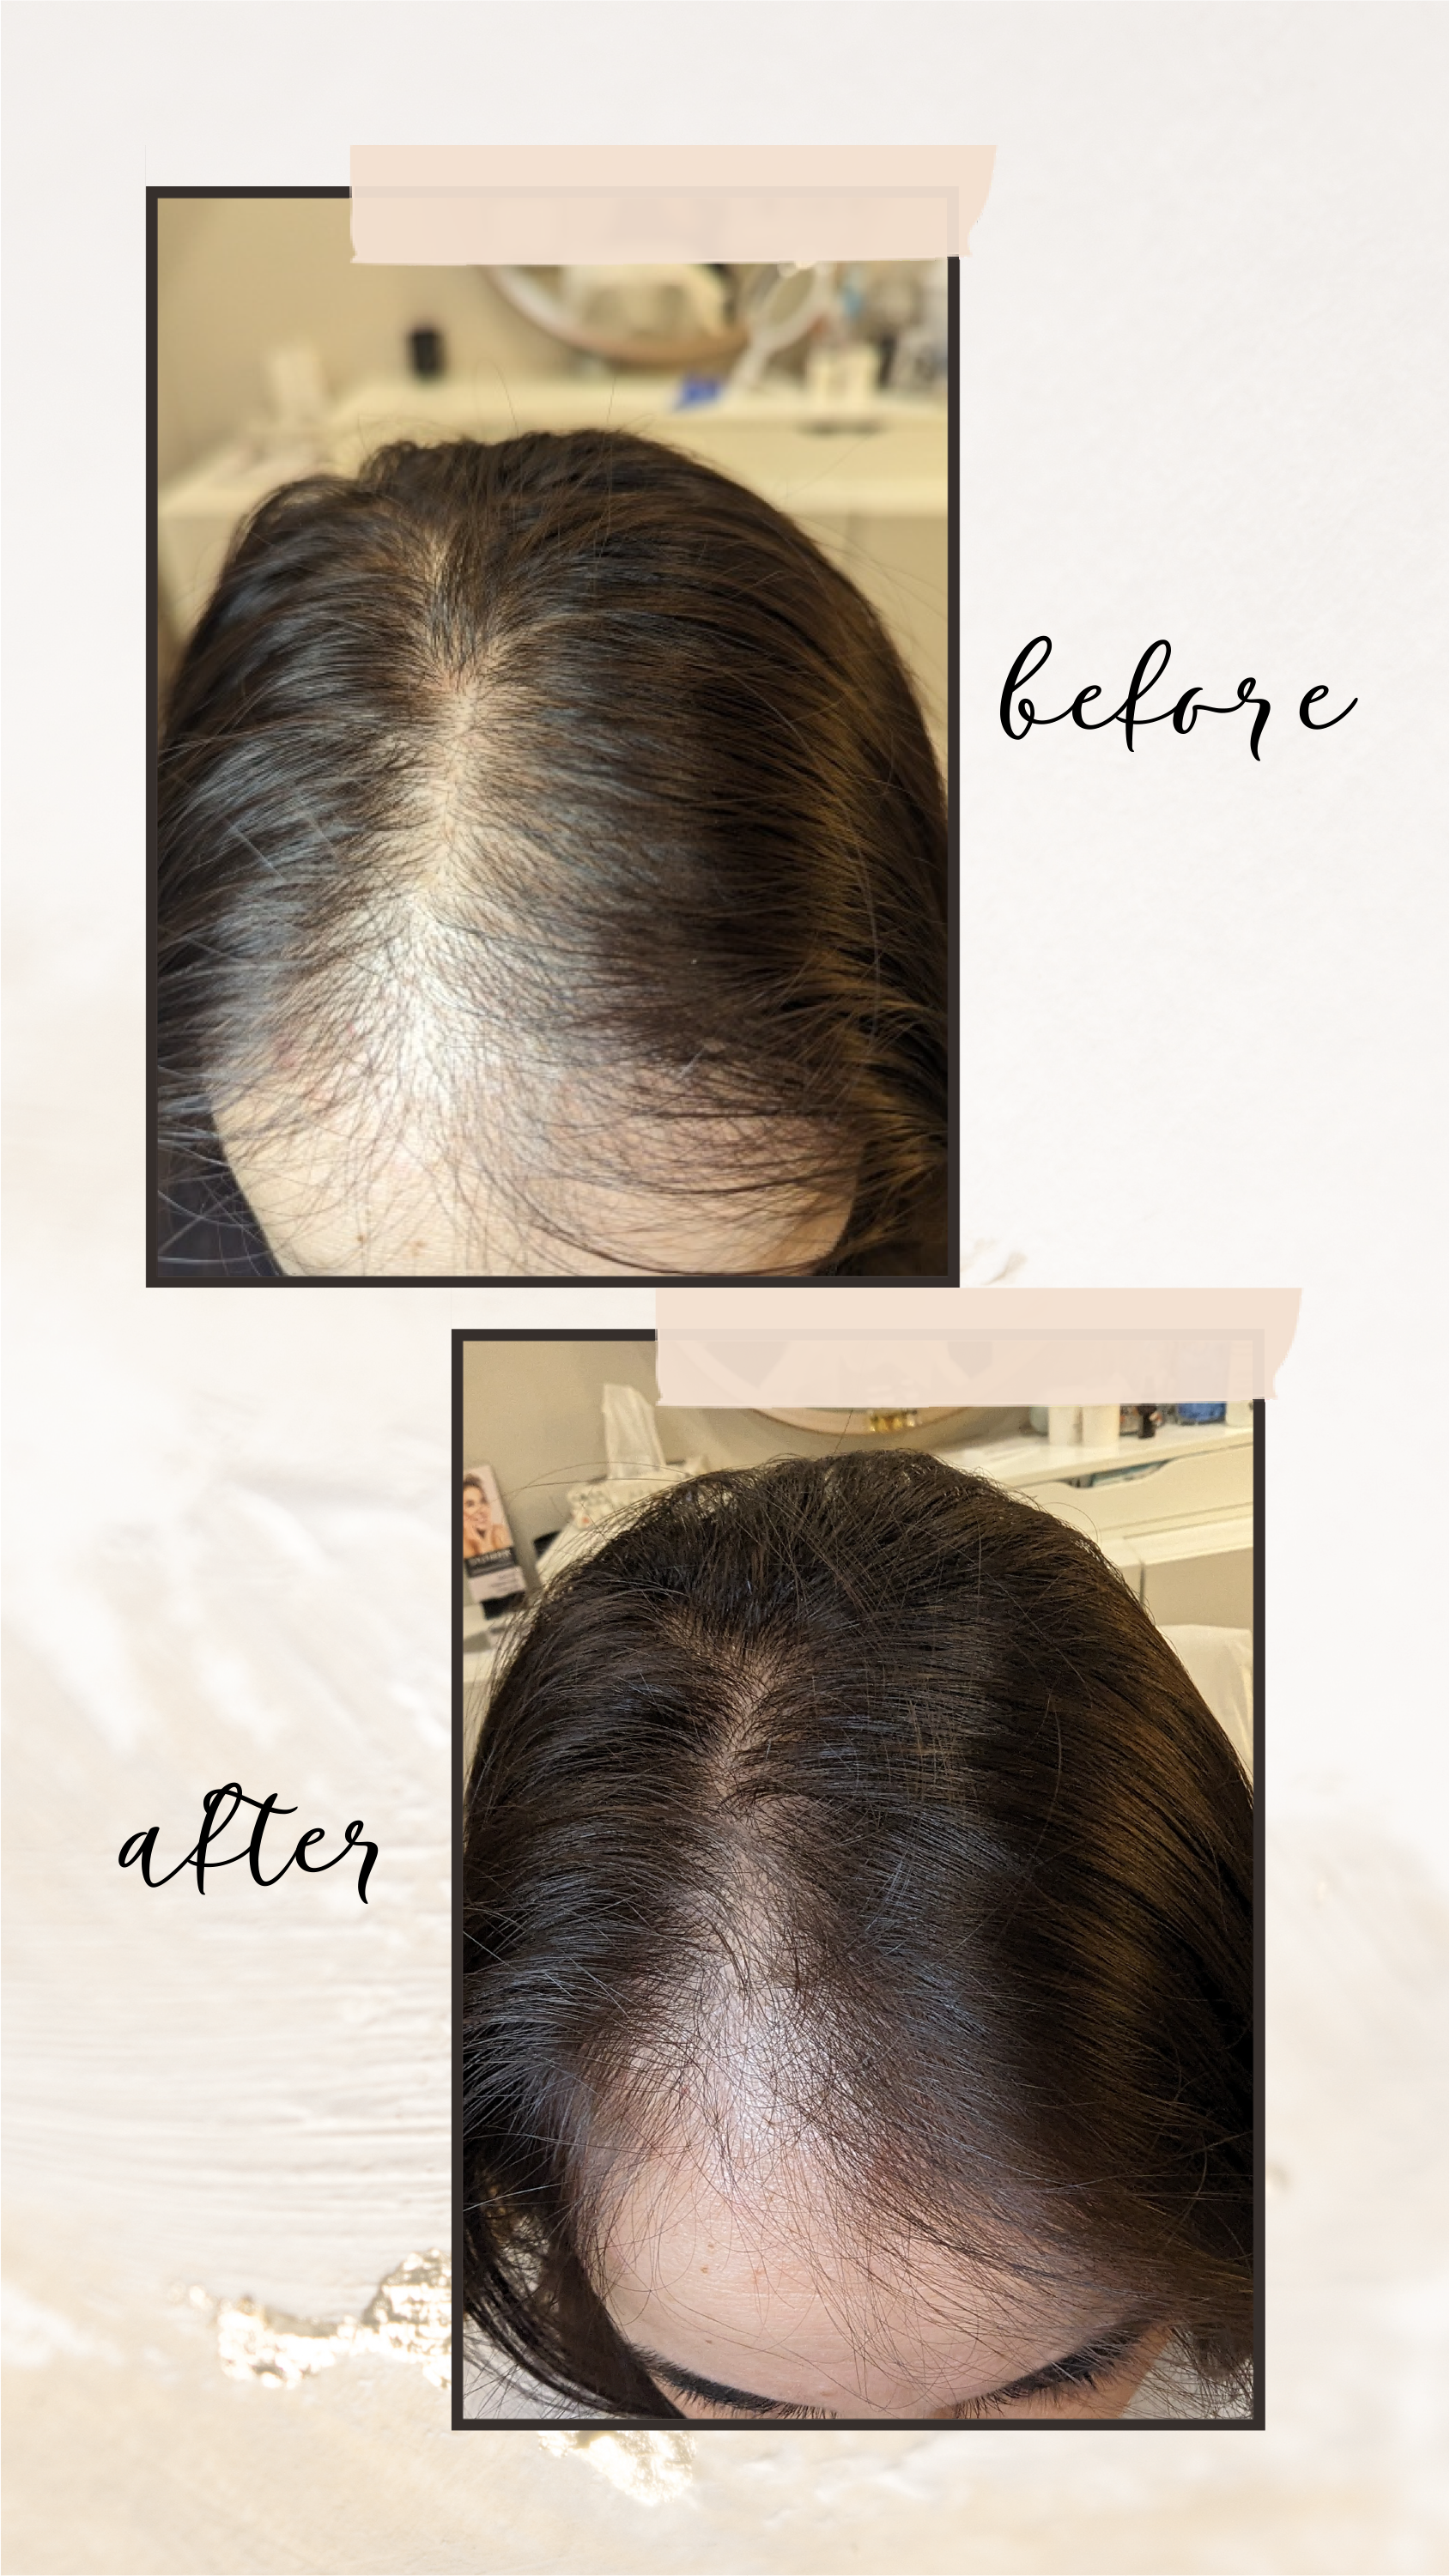 A before and after photo of a woman 's hair growth.